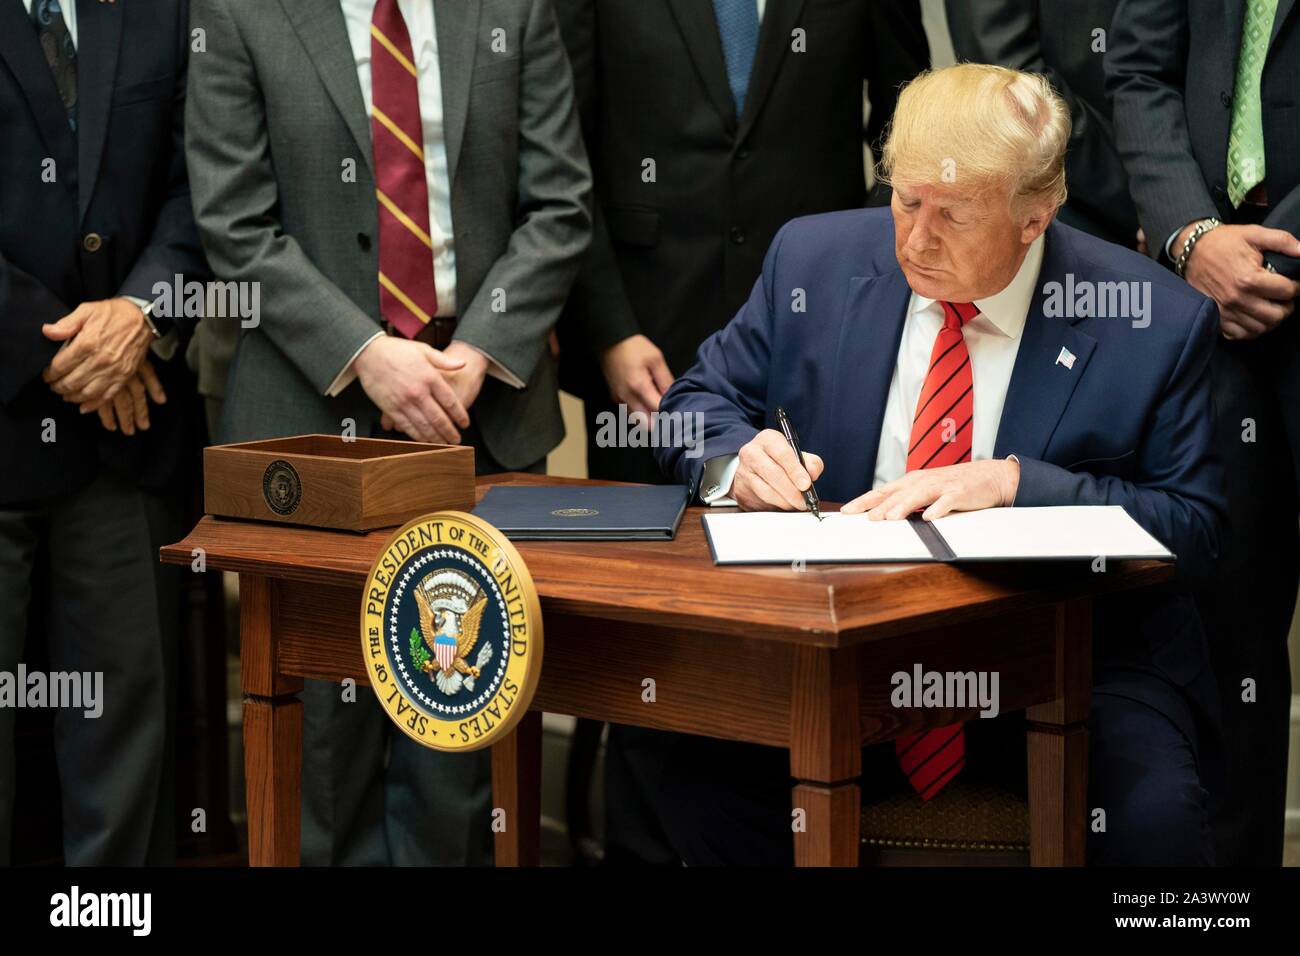 Washington, United States of America. 09 October, 2019. U.S President Donald Trump holds up the signed Executive Orders on Transparency in Federal Guidance and Enforcement during a ceremony in the Roosevelt Room of the White House October 9, 2019 in Washington, DC.  Credit: Shealah Craighead/White House Photo/Alamy Live News Stock Photo